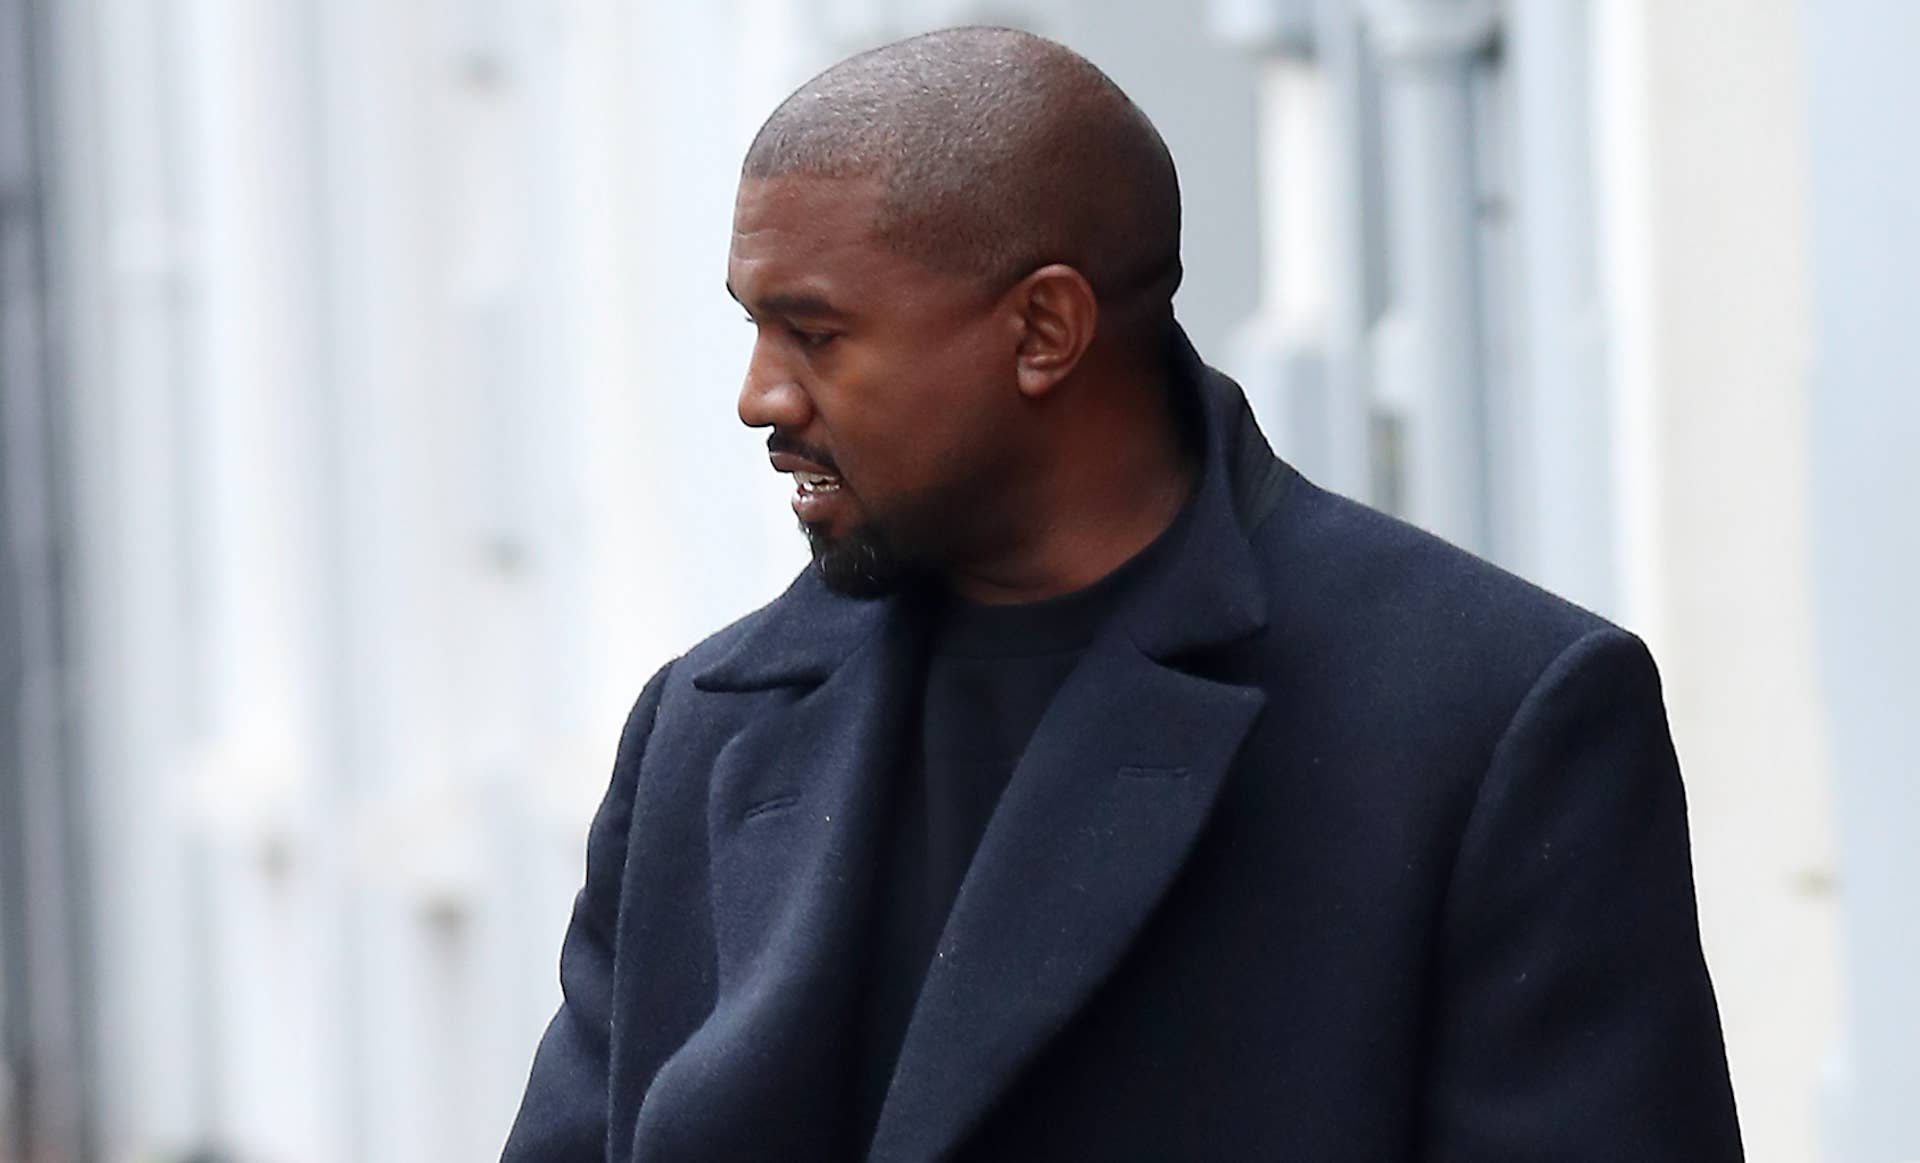 OMG! Ye and Demna are joining forces on a Gap collection